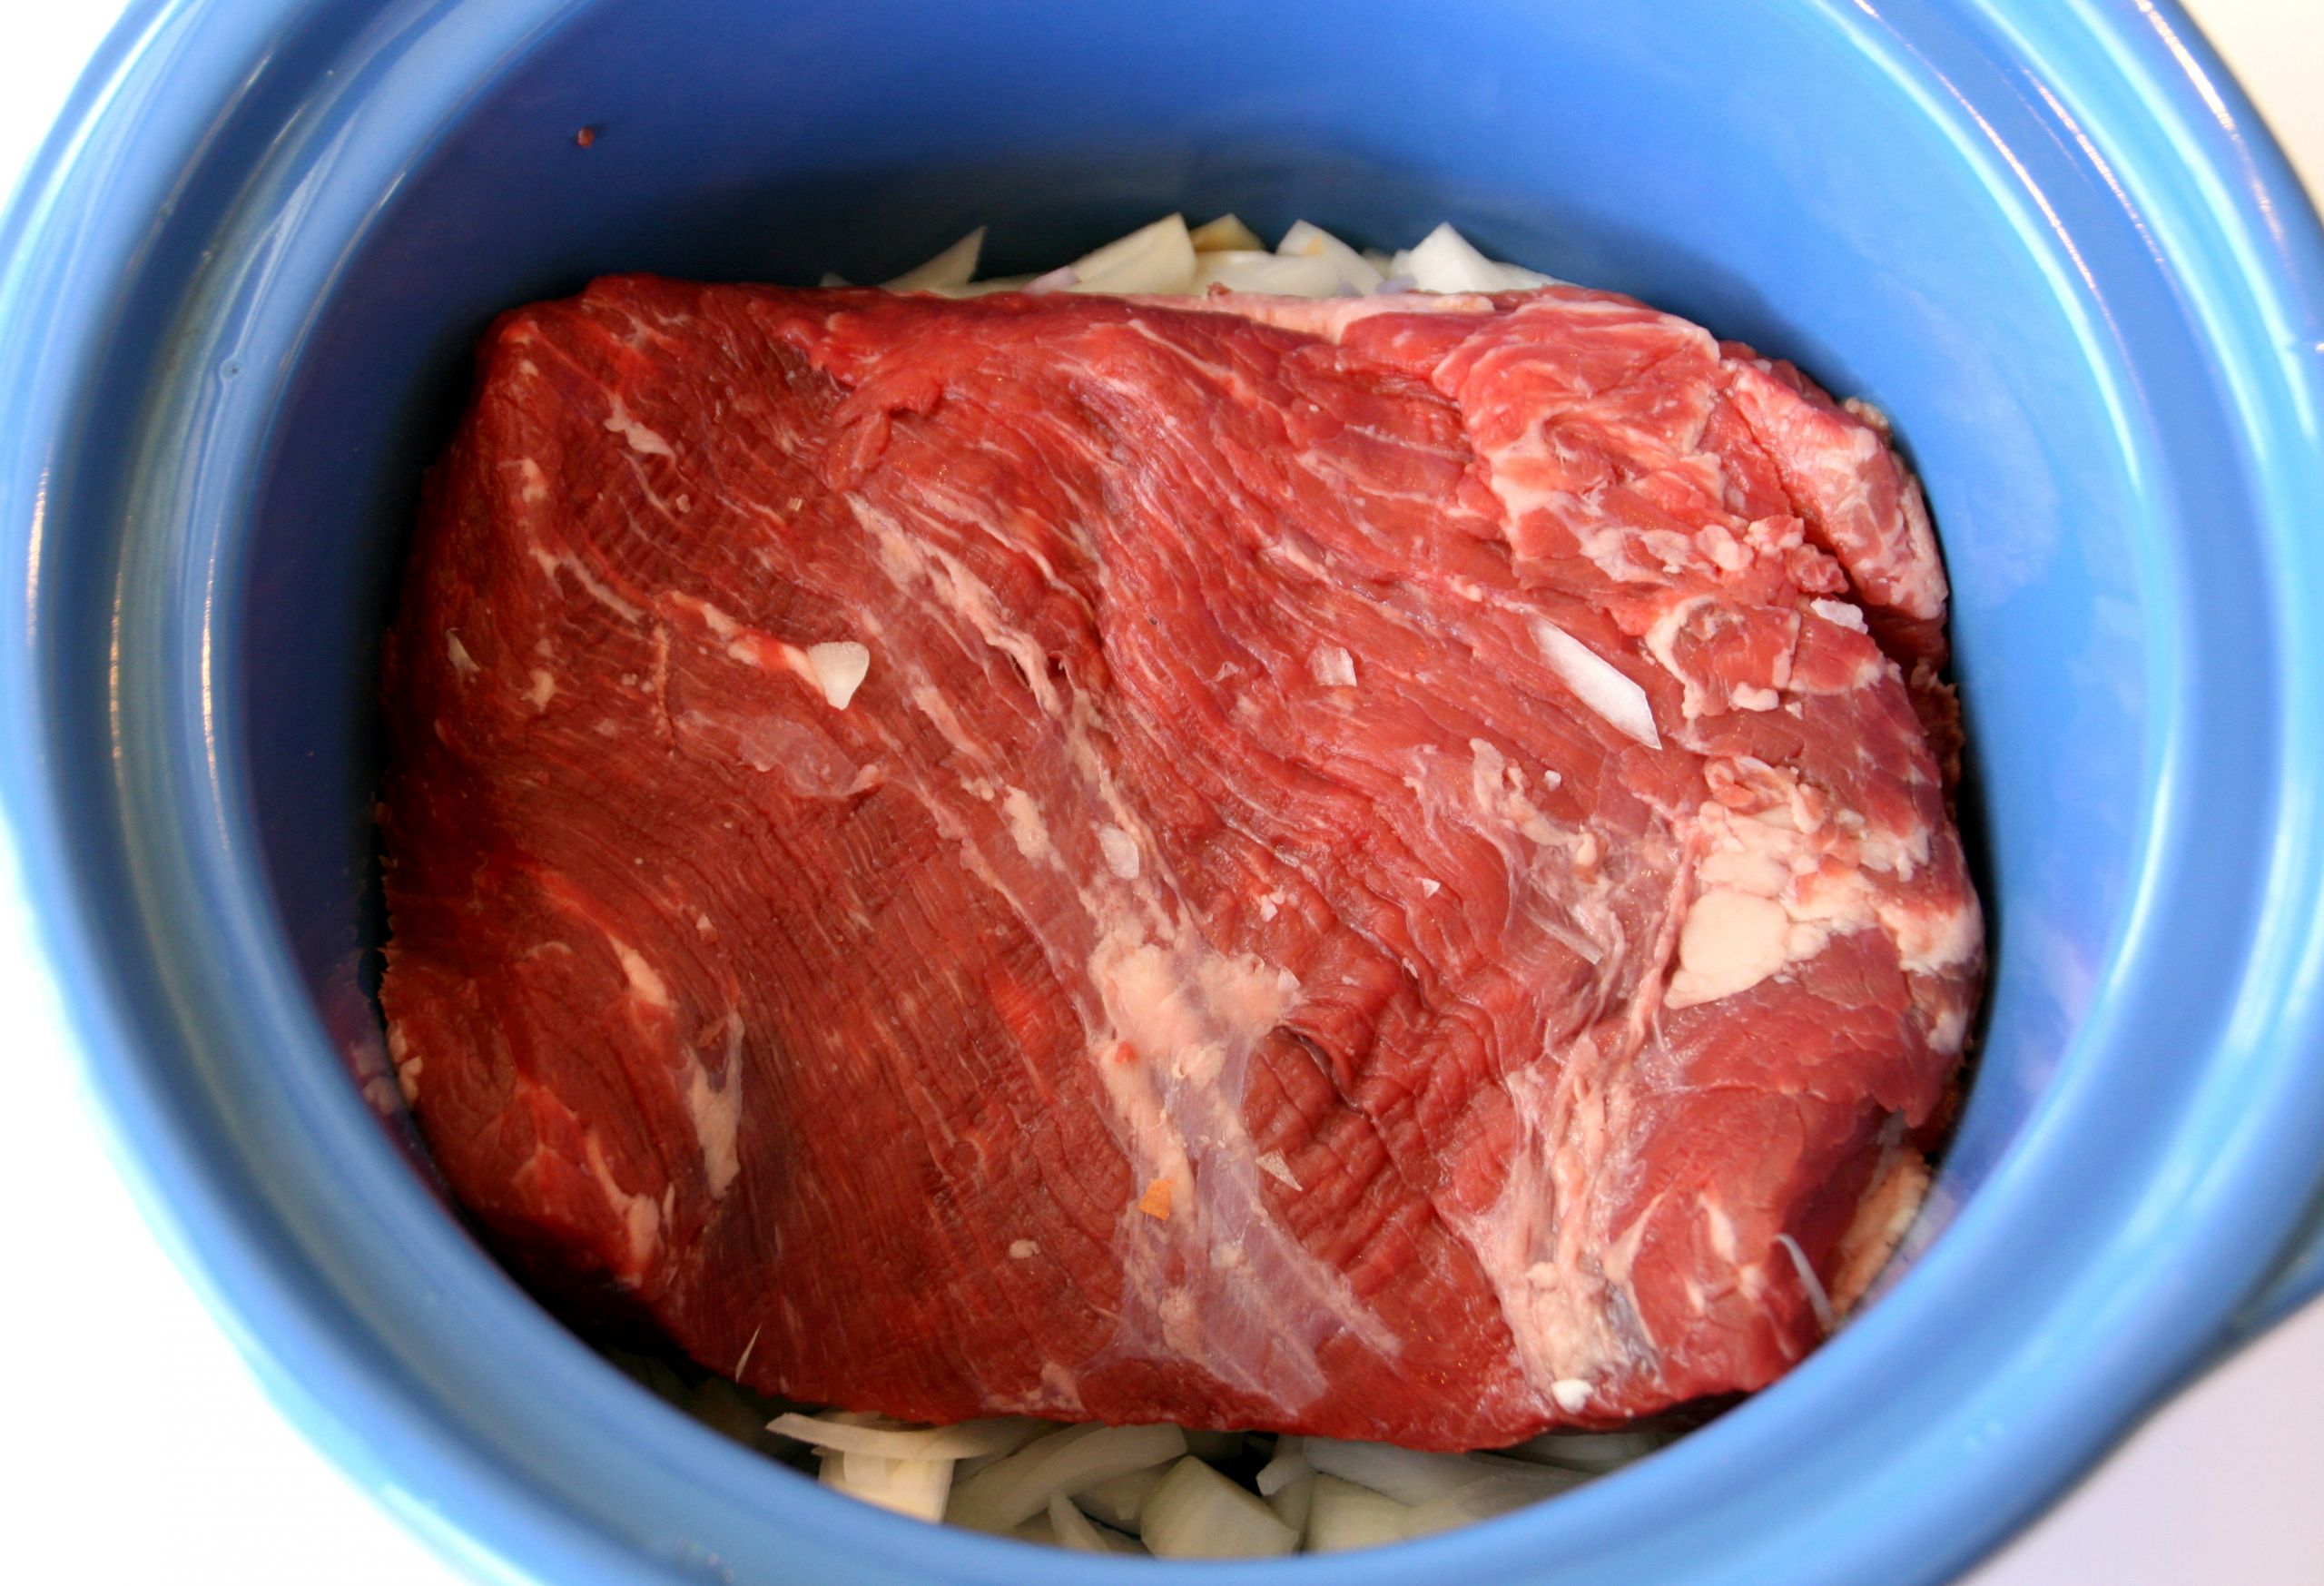 Passover Brisket Recipe Slow Cooker
 Best Brisket for Passover or Any Day